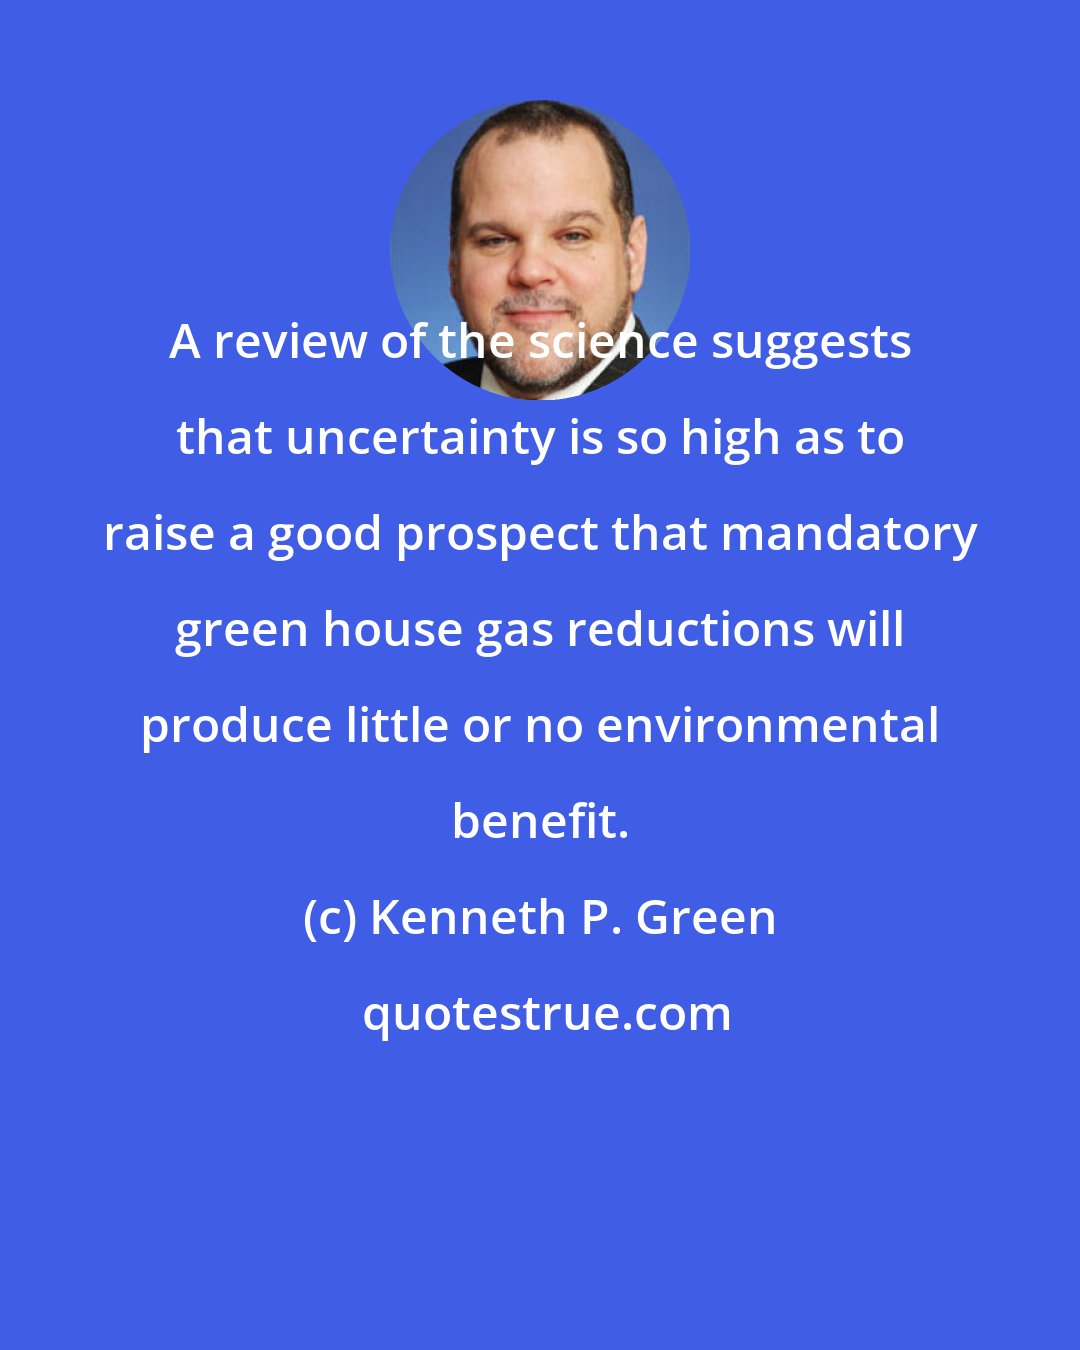 Kenneth P. Green: A review of the science suggests that uncertainty is so high as to raise a good prospect that mandatory green house gas reductions will produce little or no environmental benefit.